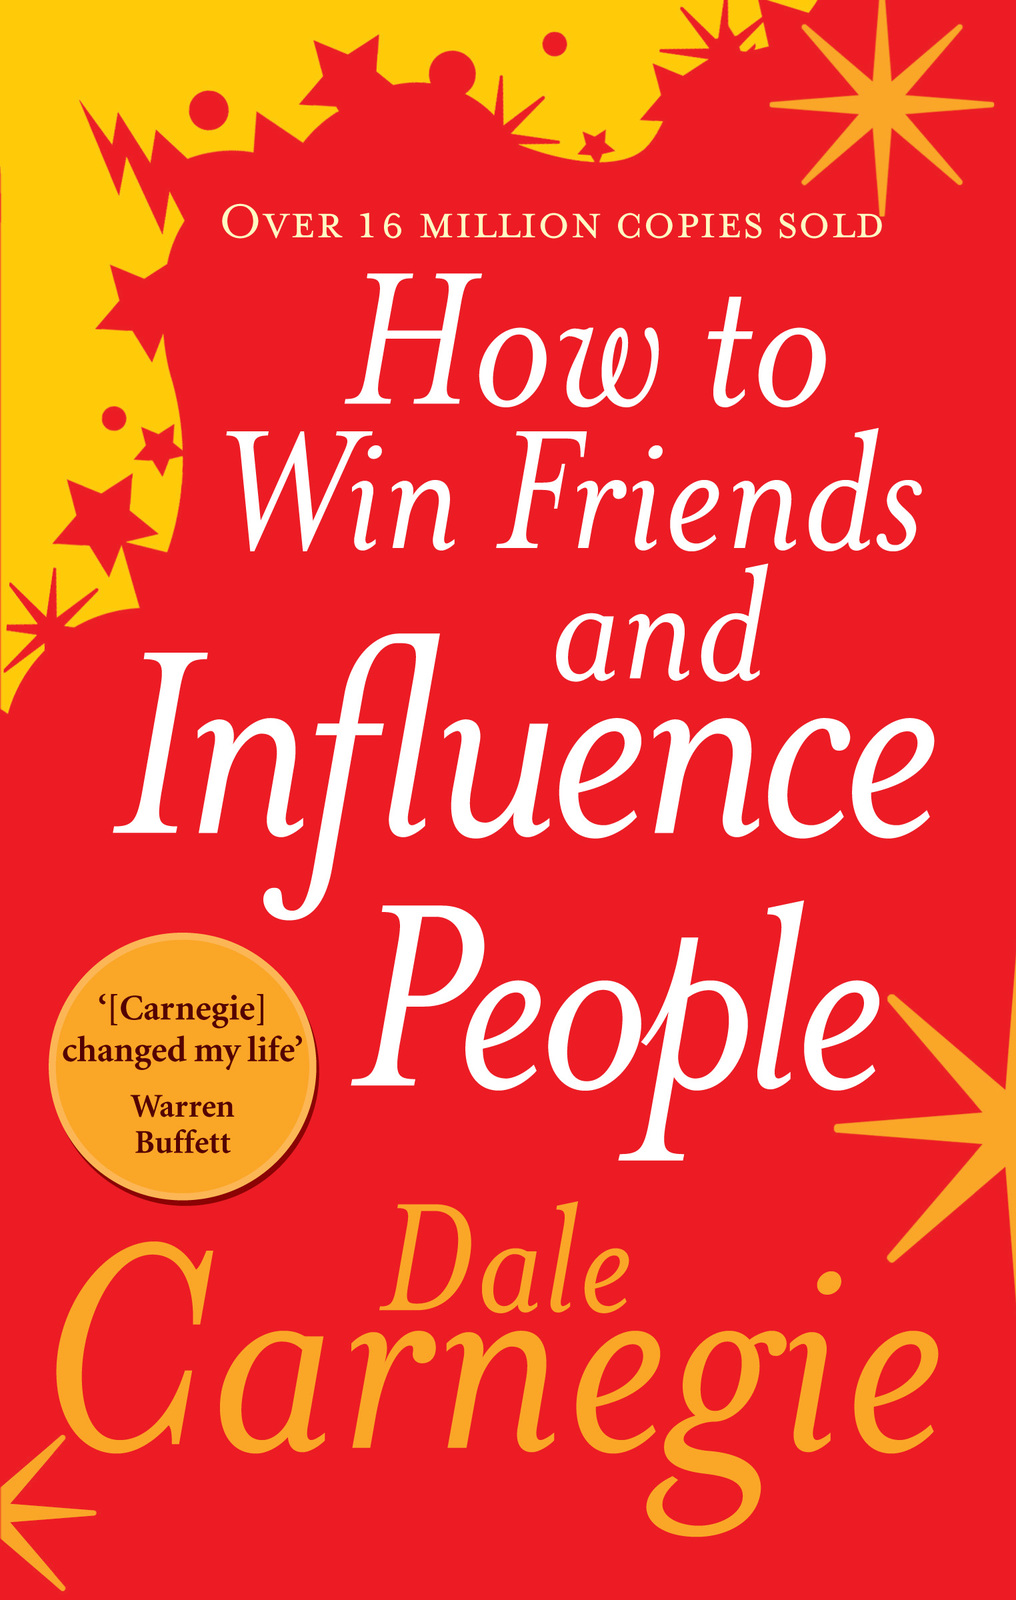 dale carnegie how to win friends and influence people epub